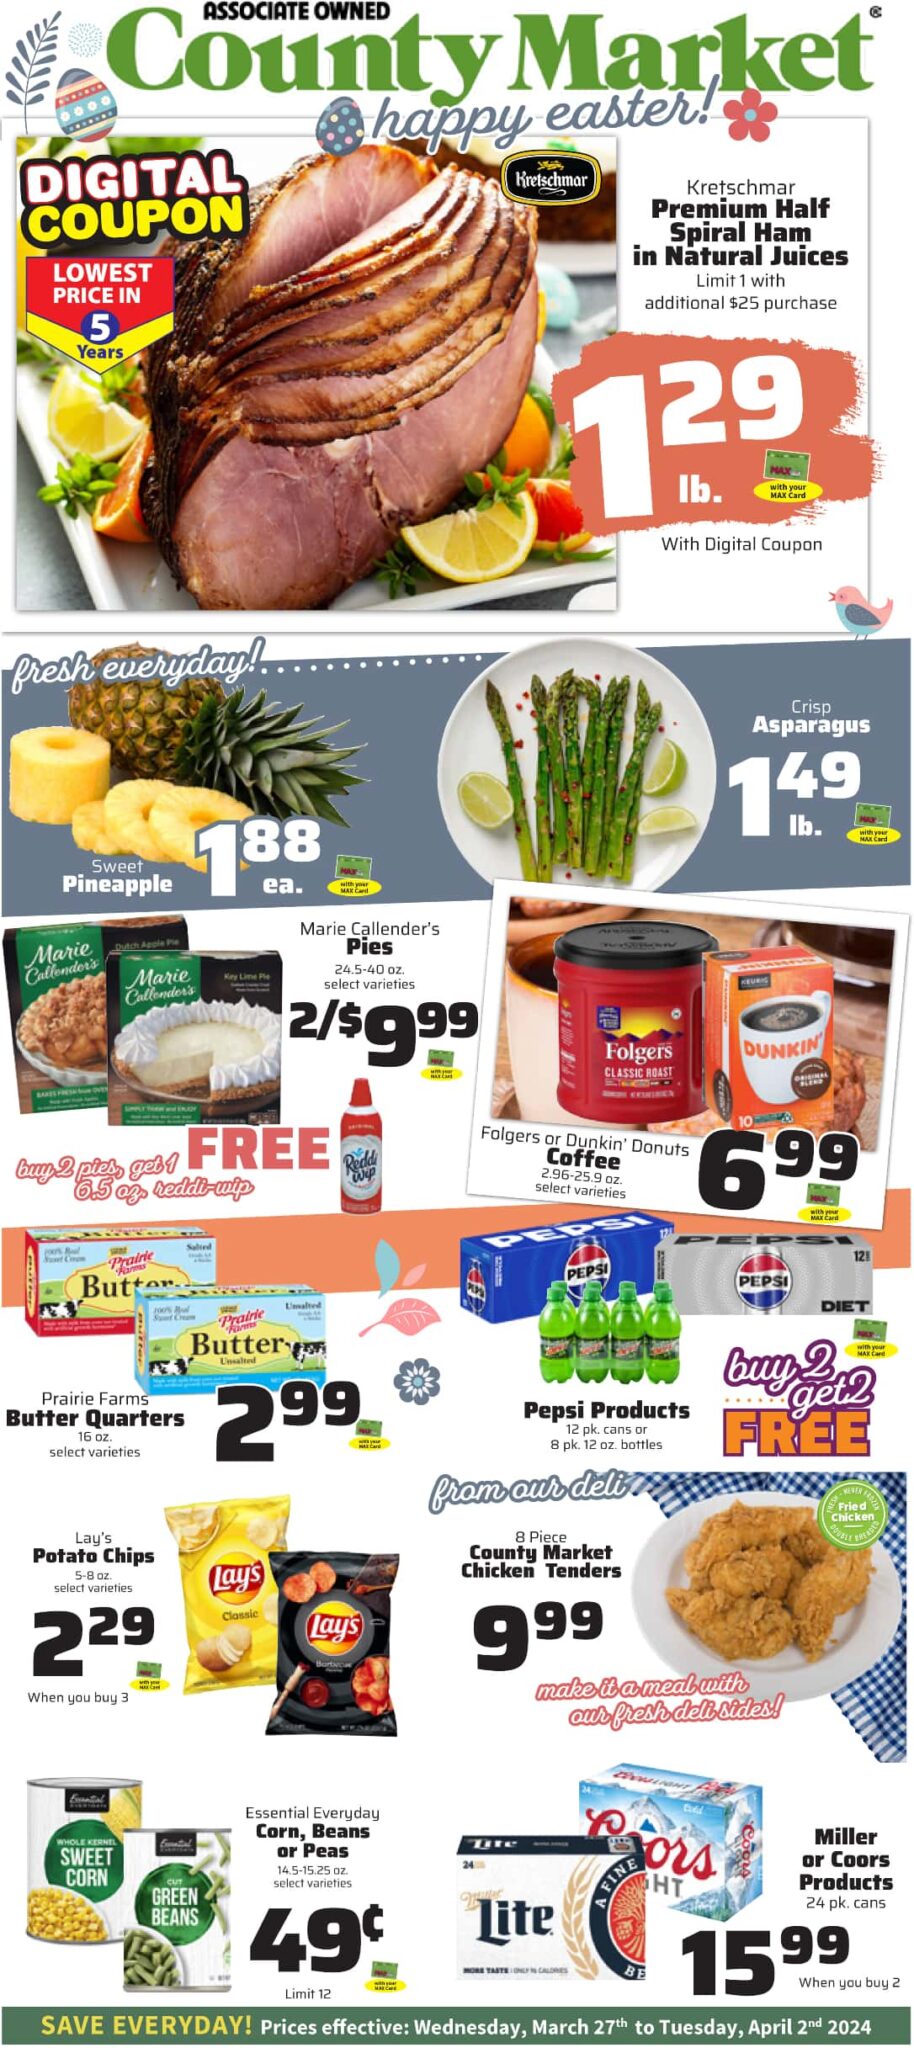 County Market Weekly Ad